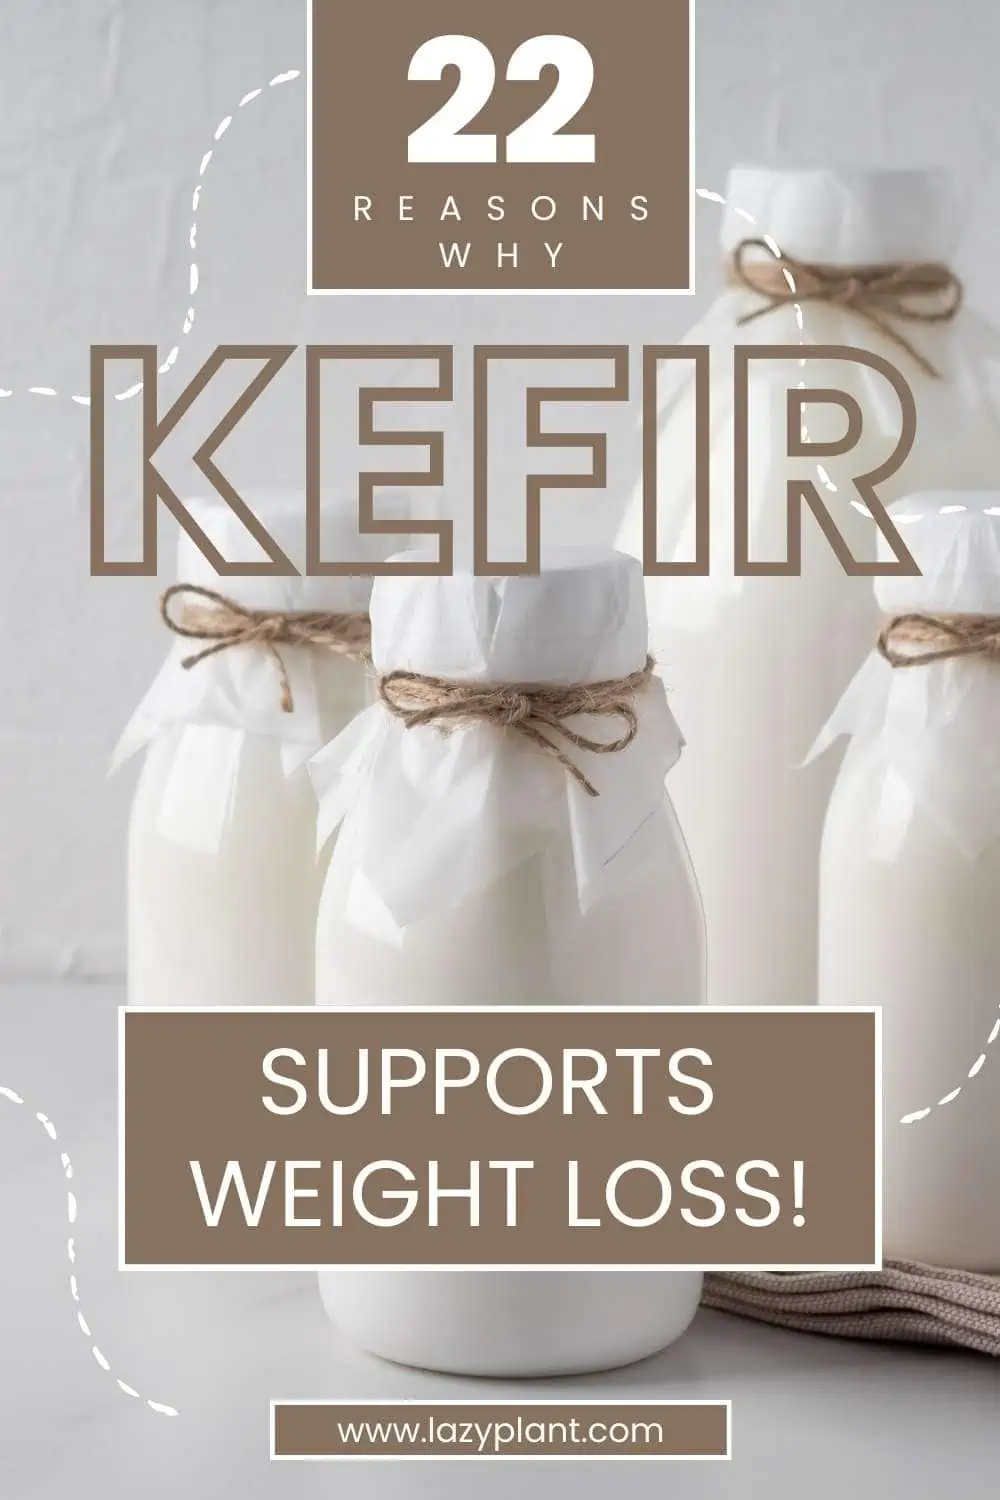 22 reasons why drinking a cup of kefir daily enhances weight loss!